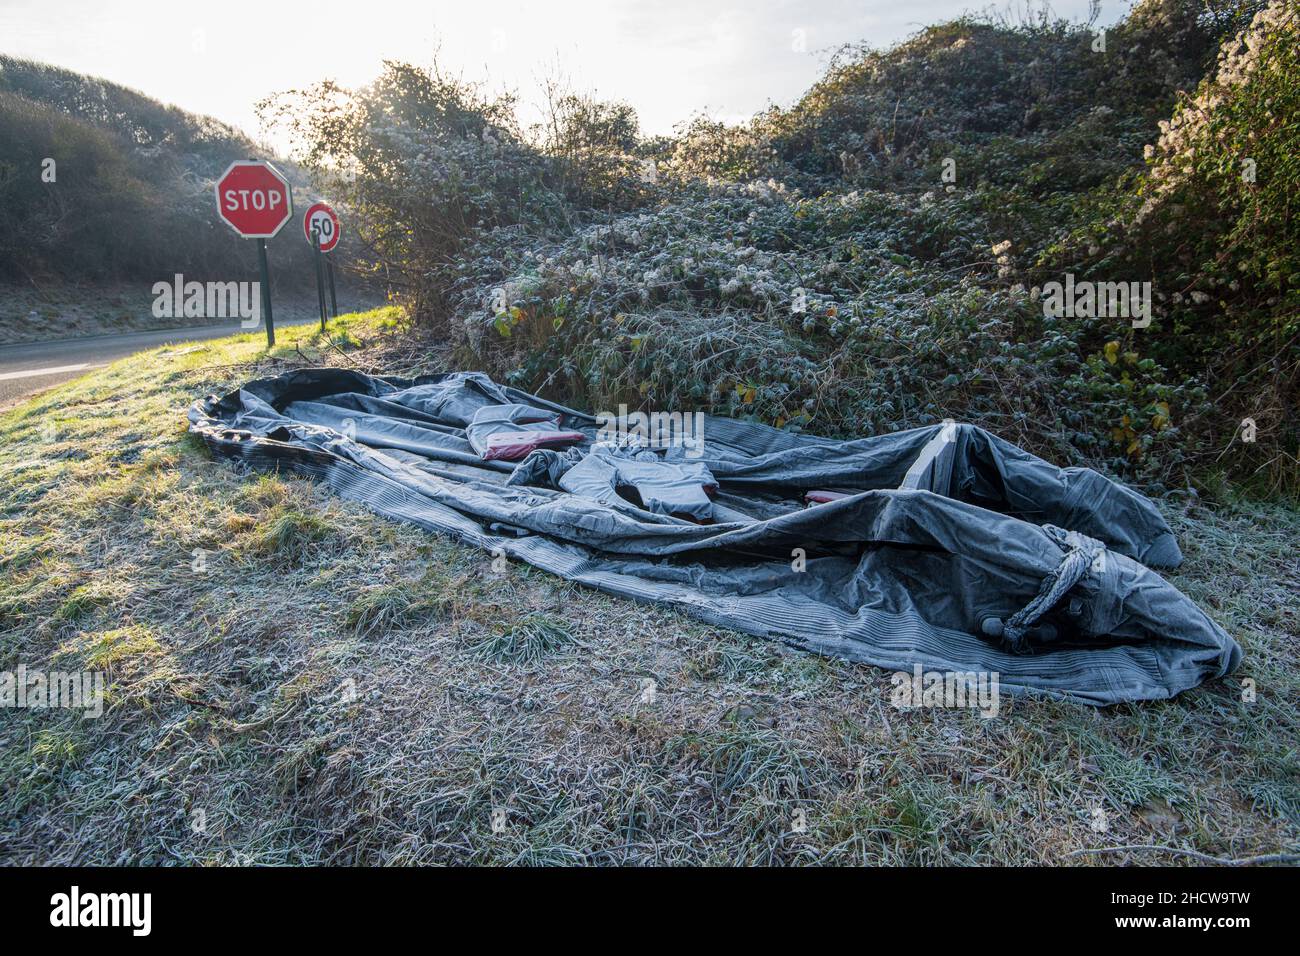 Ambleteuse, France - December 22, 2021 : inflatable boat and life jacket abandoned by migrants wishing to cross the Channel. Stock Photo